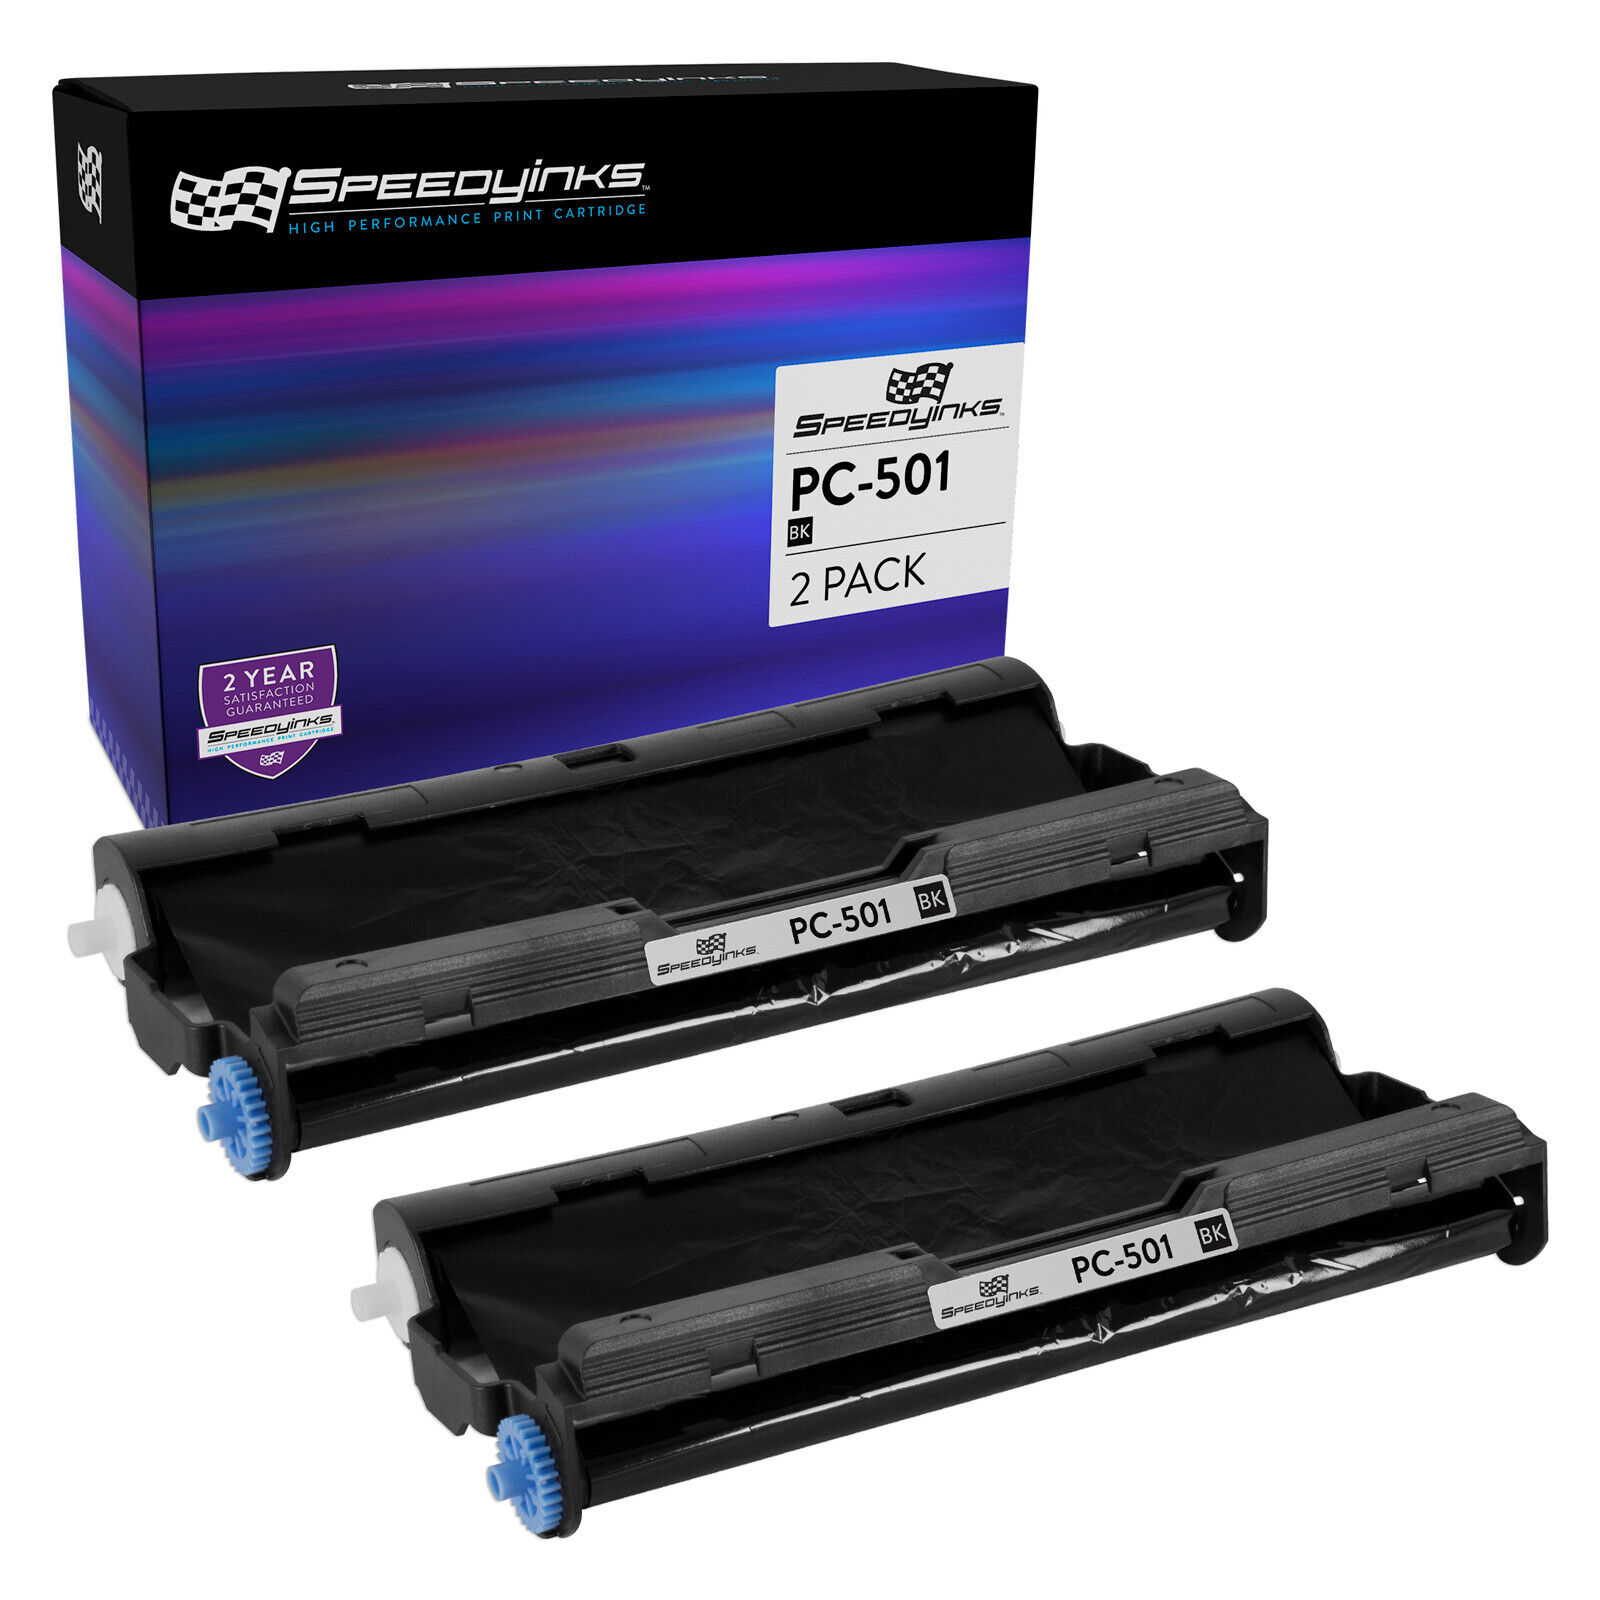 2 pack Compatible PC501 Fax Cartridge with Roll for Brother FAX 575, 878 Printer